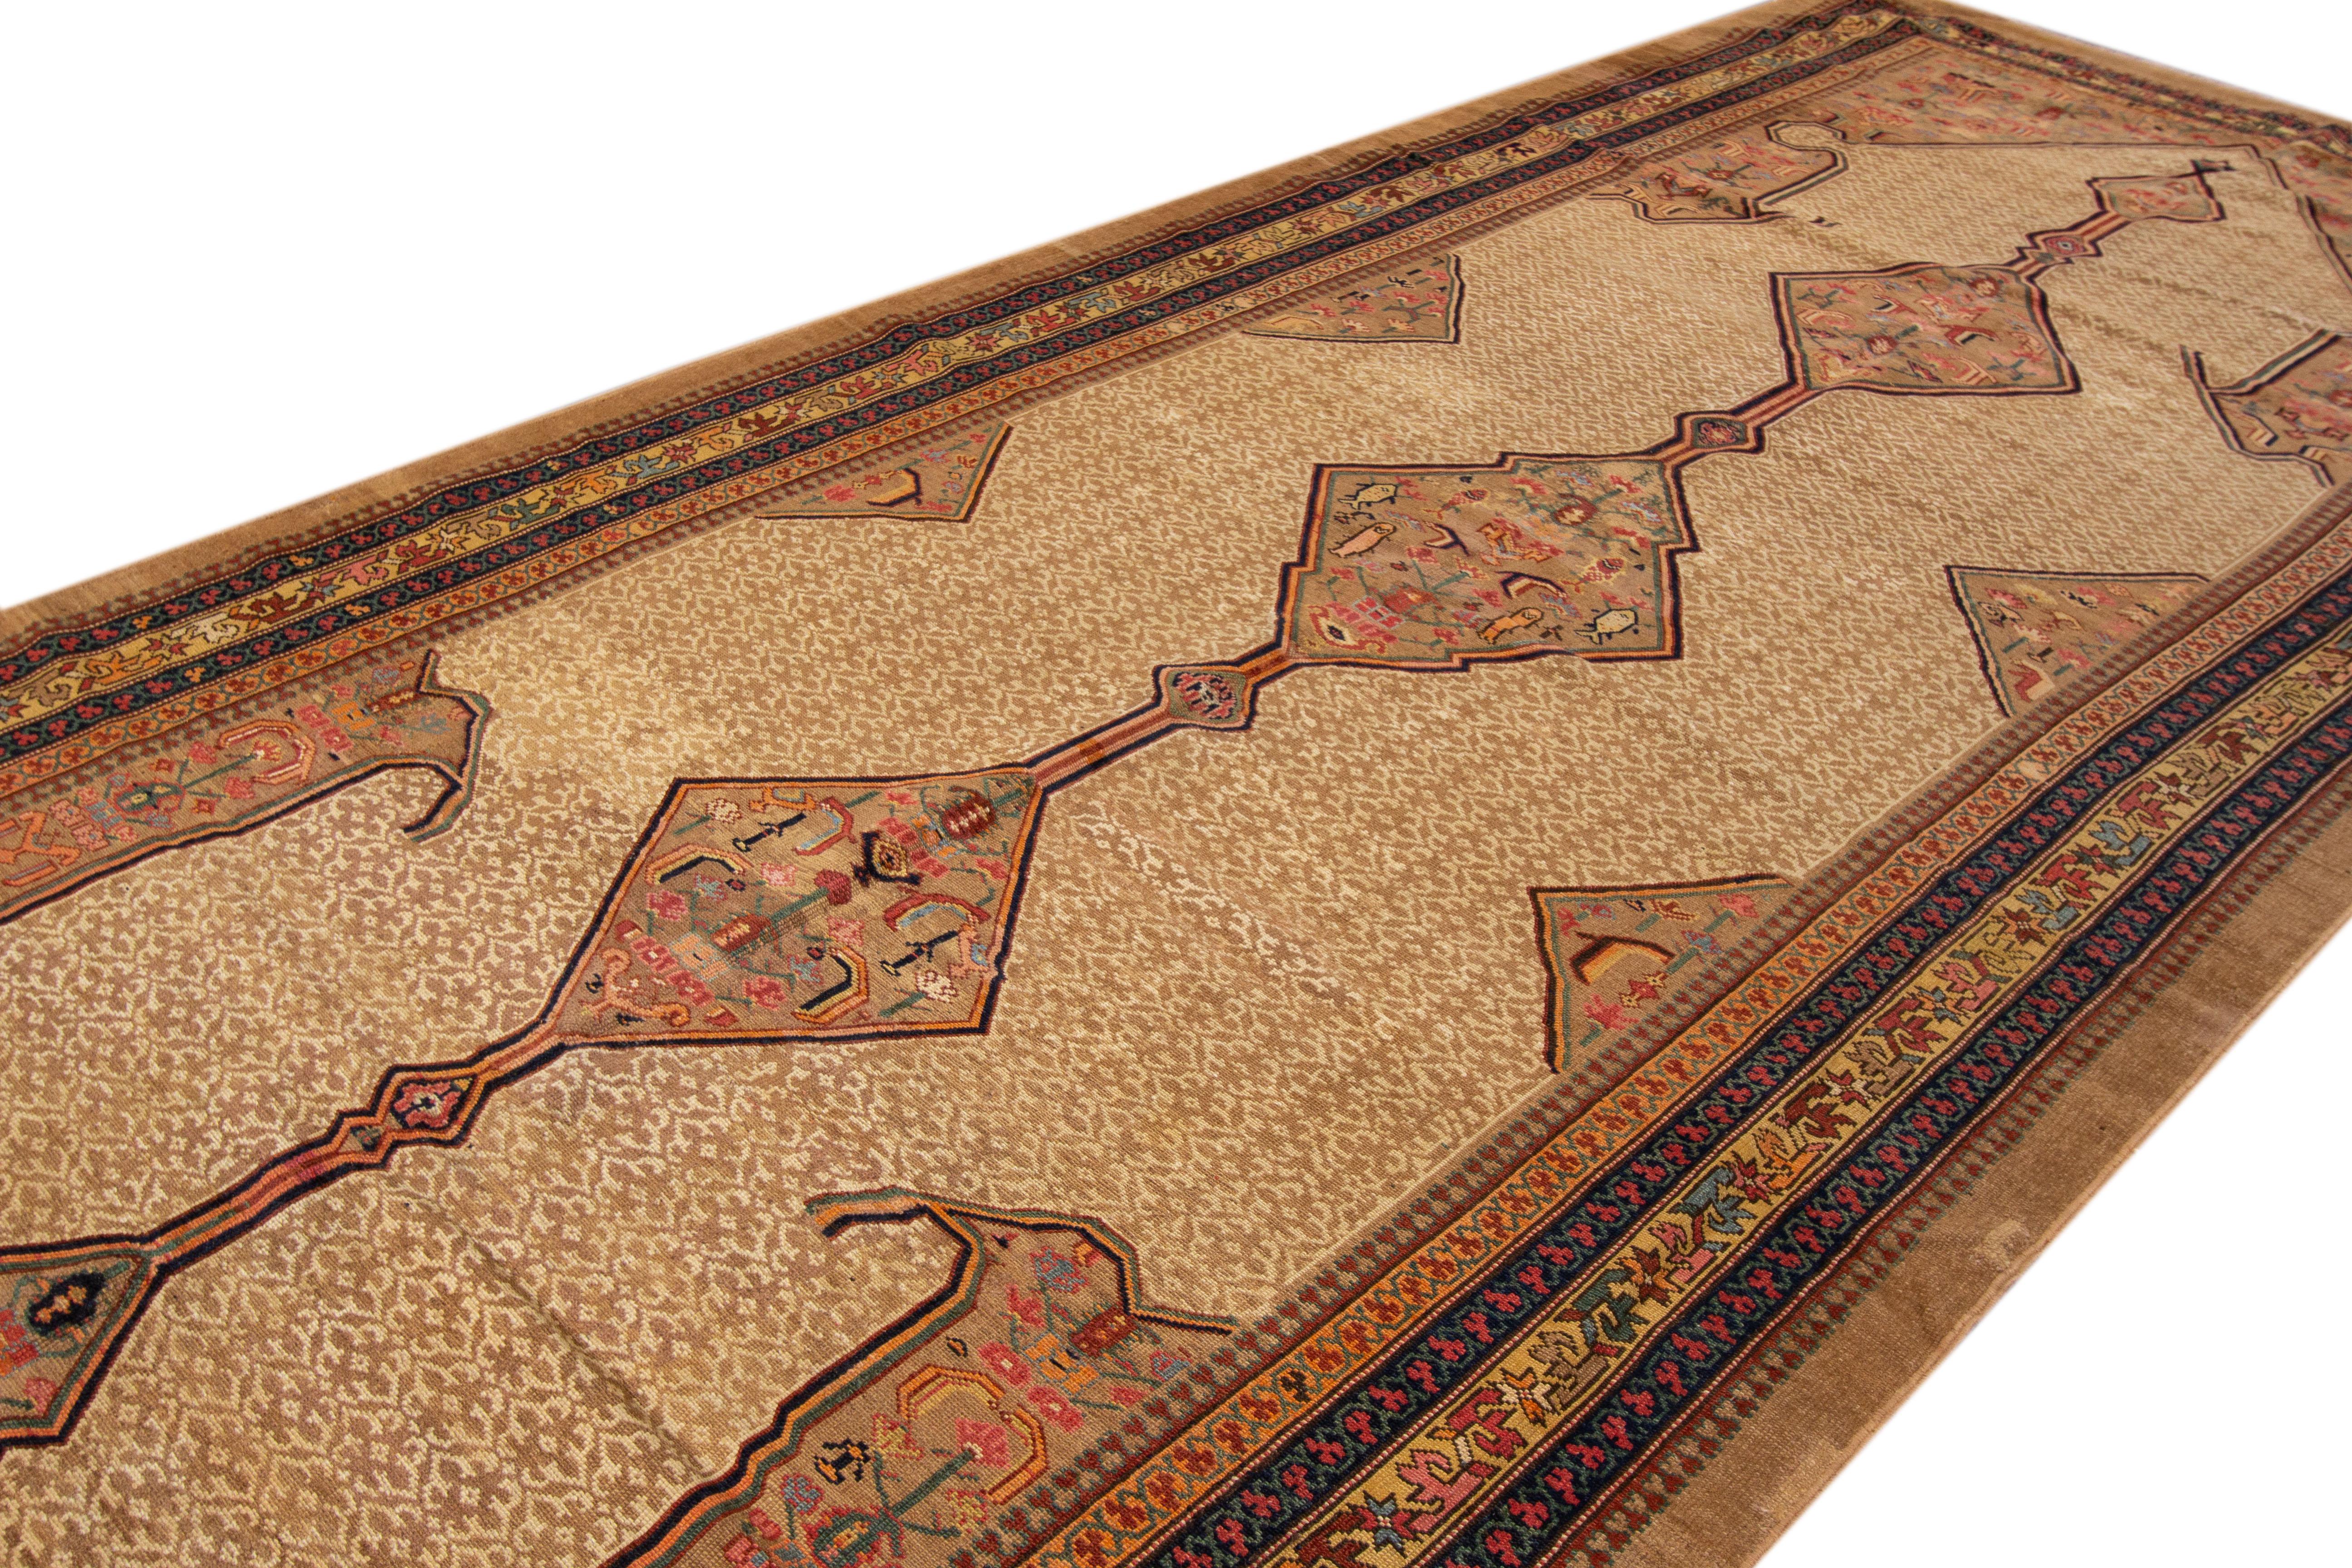 Antique Persian Serab hand-knotted wool rug with a tan and brown color field. This piece has multicolor accents in a beautiful classic tribal motif.

This rug measures: 6'6